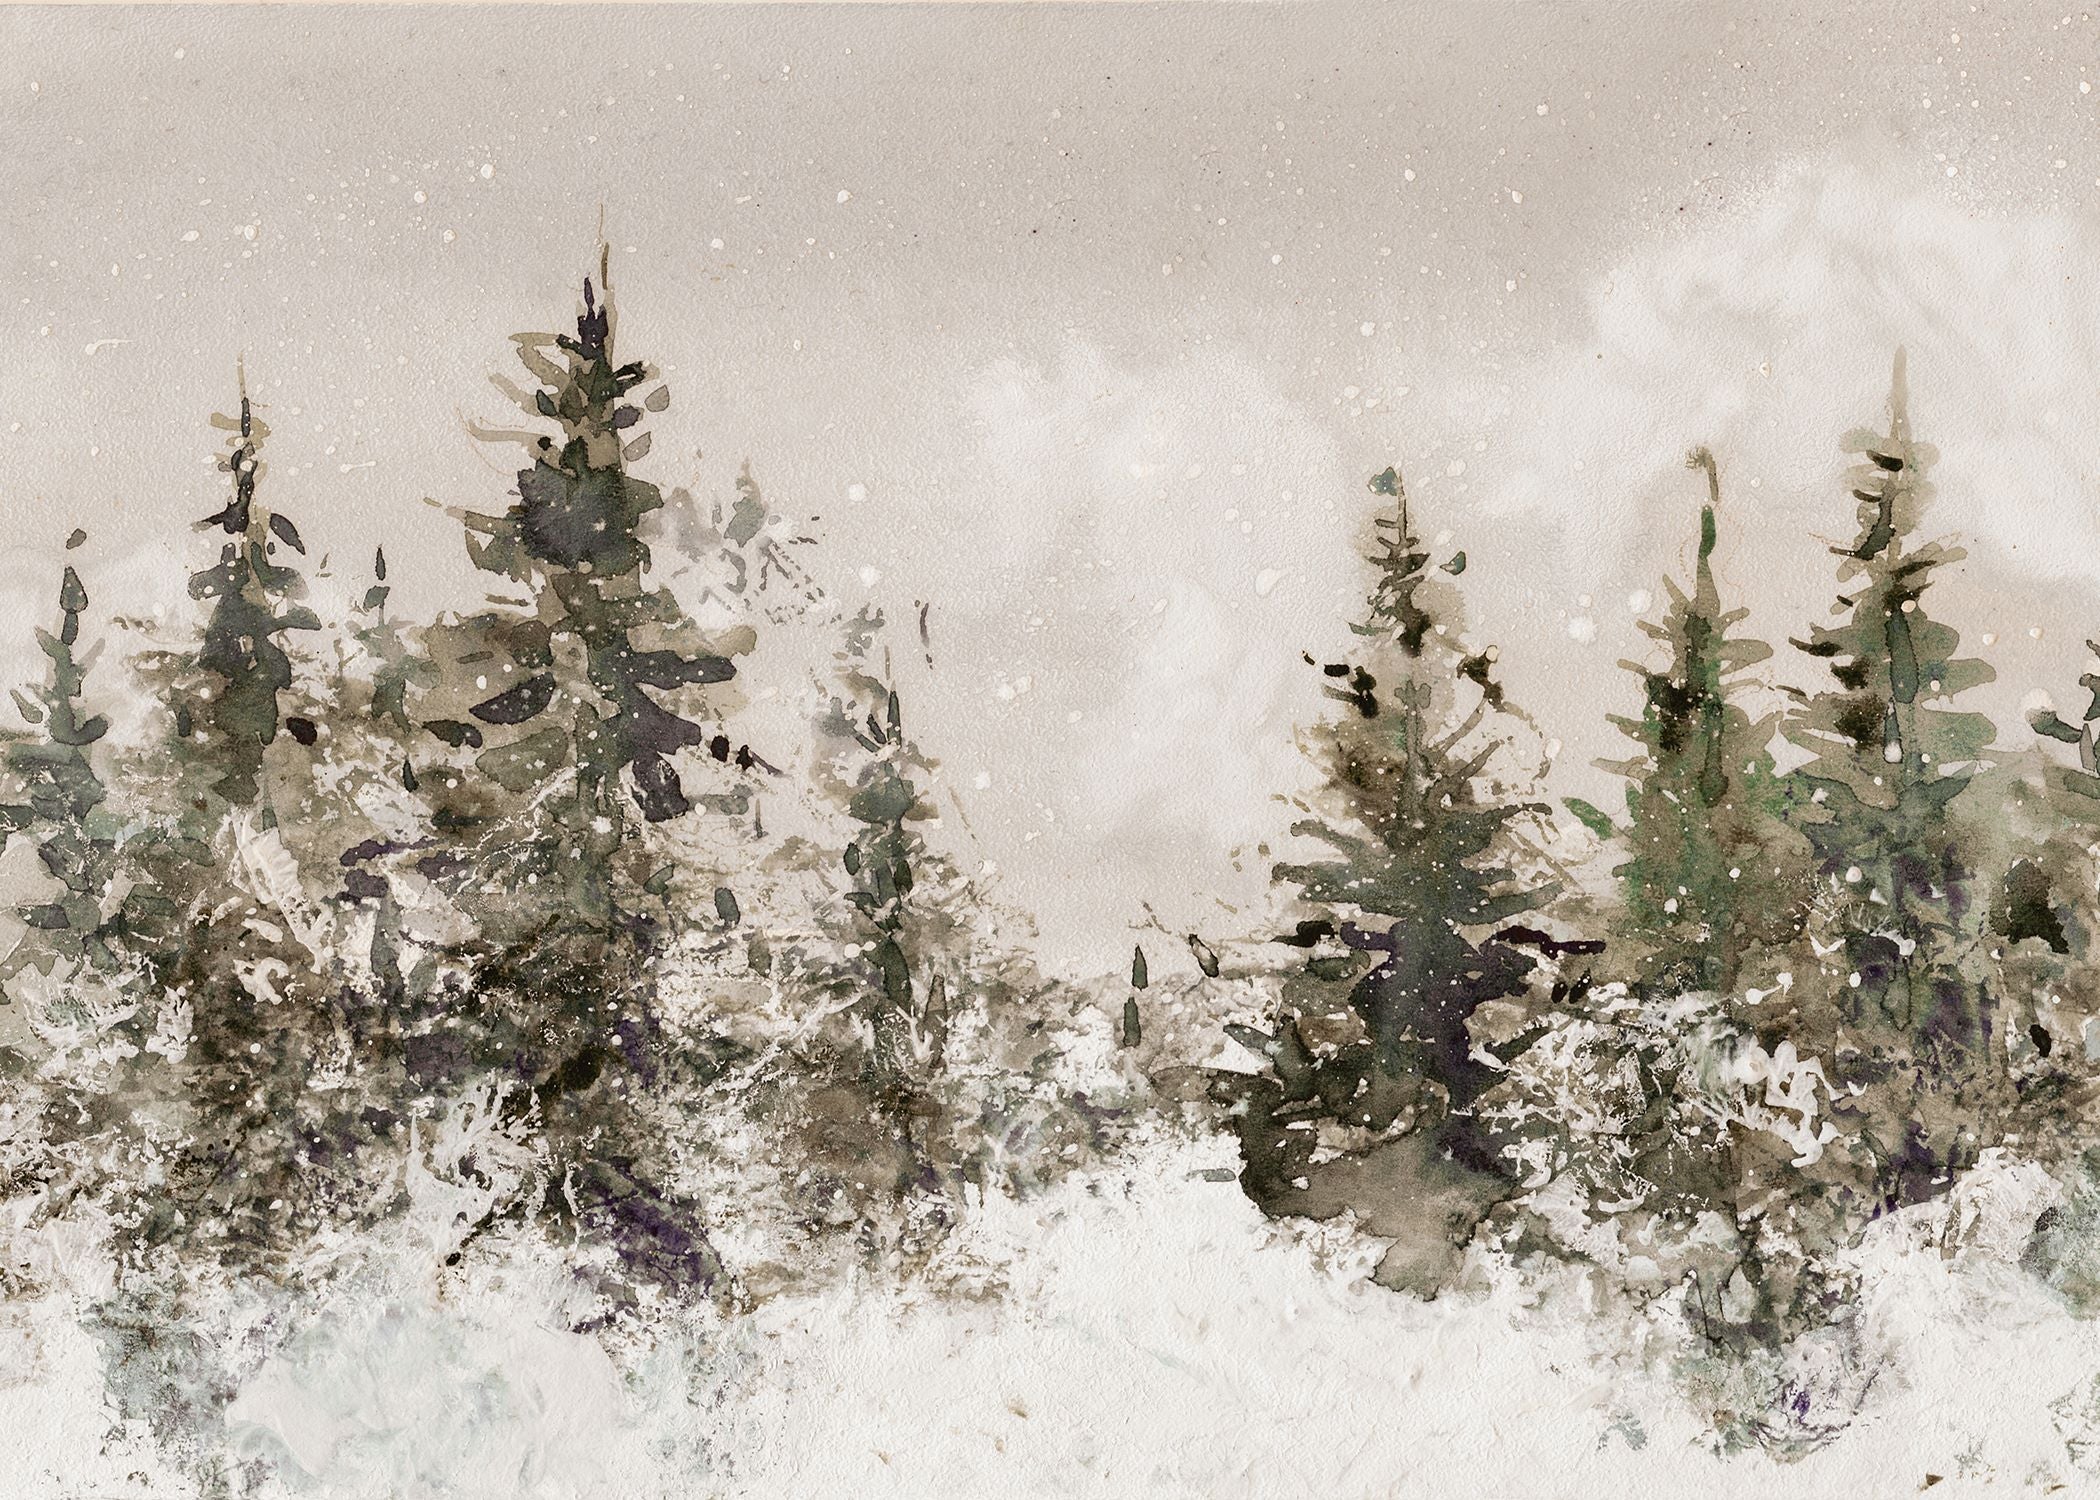 Snow Covered Pines